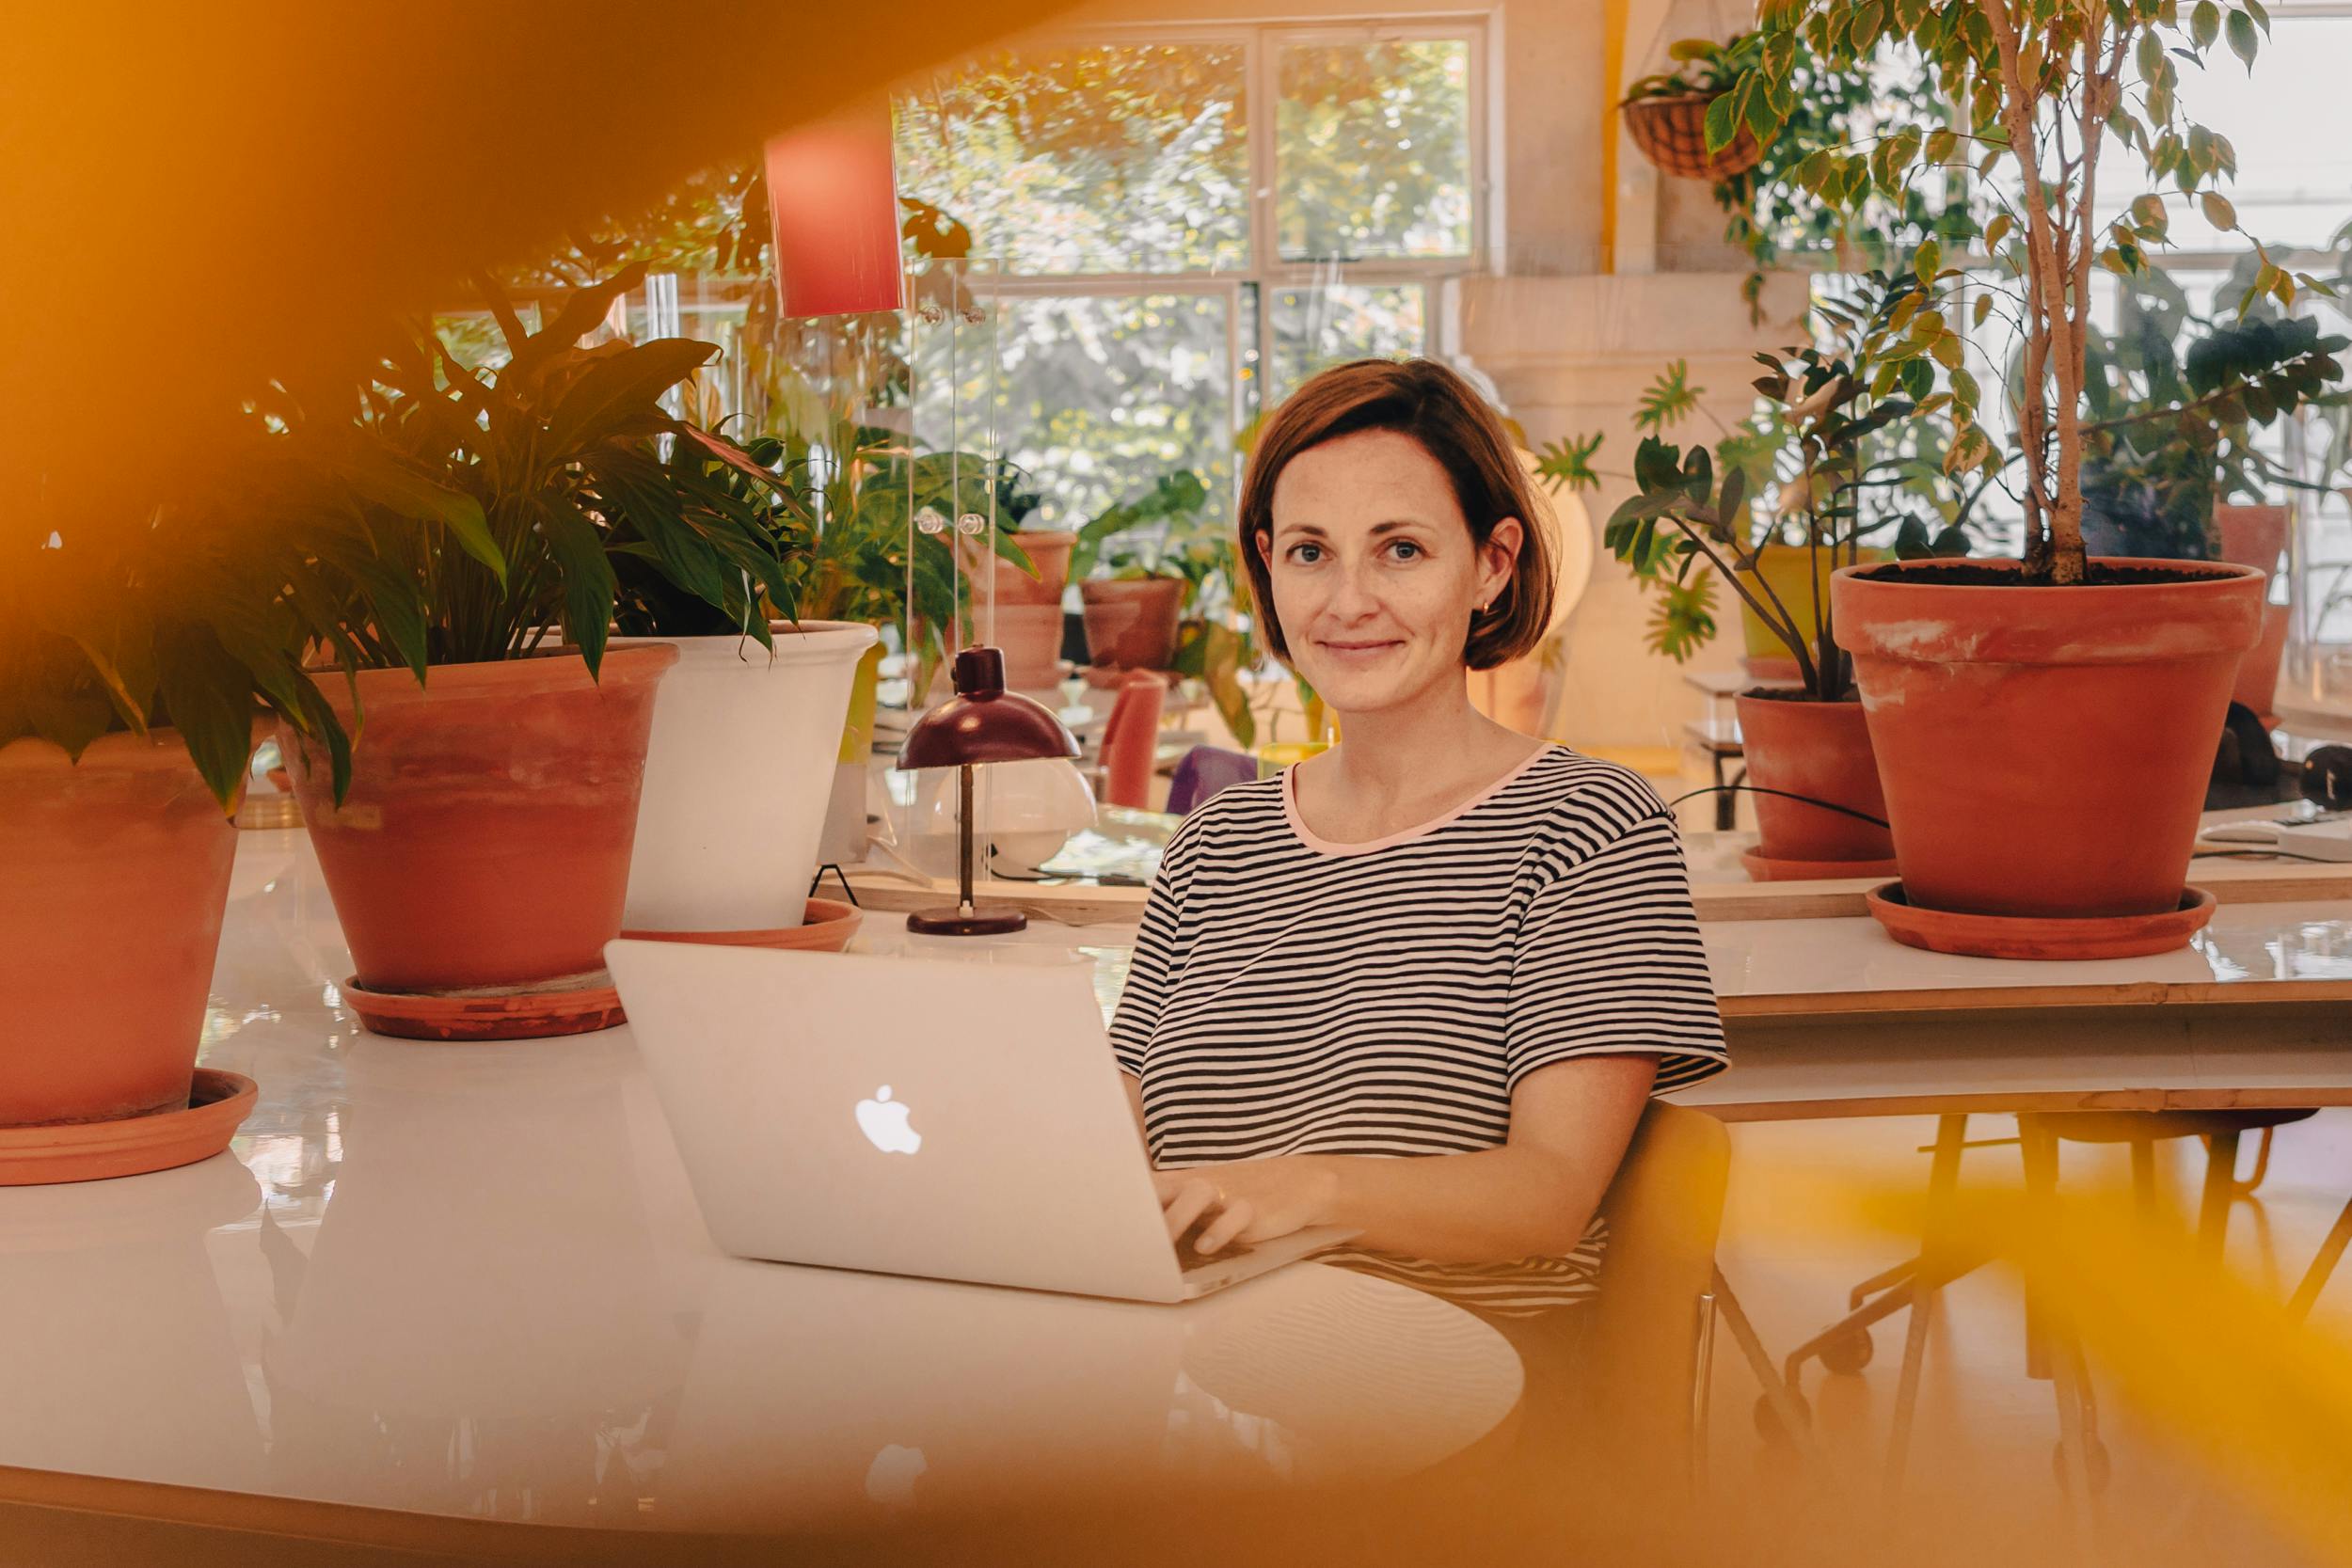 Woman with short hair sitting in front of a computer, posing with a smile and surrounded by vased plants